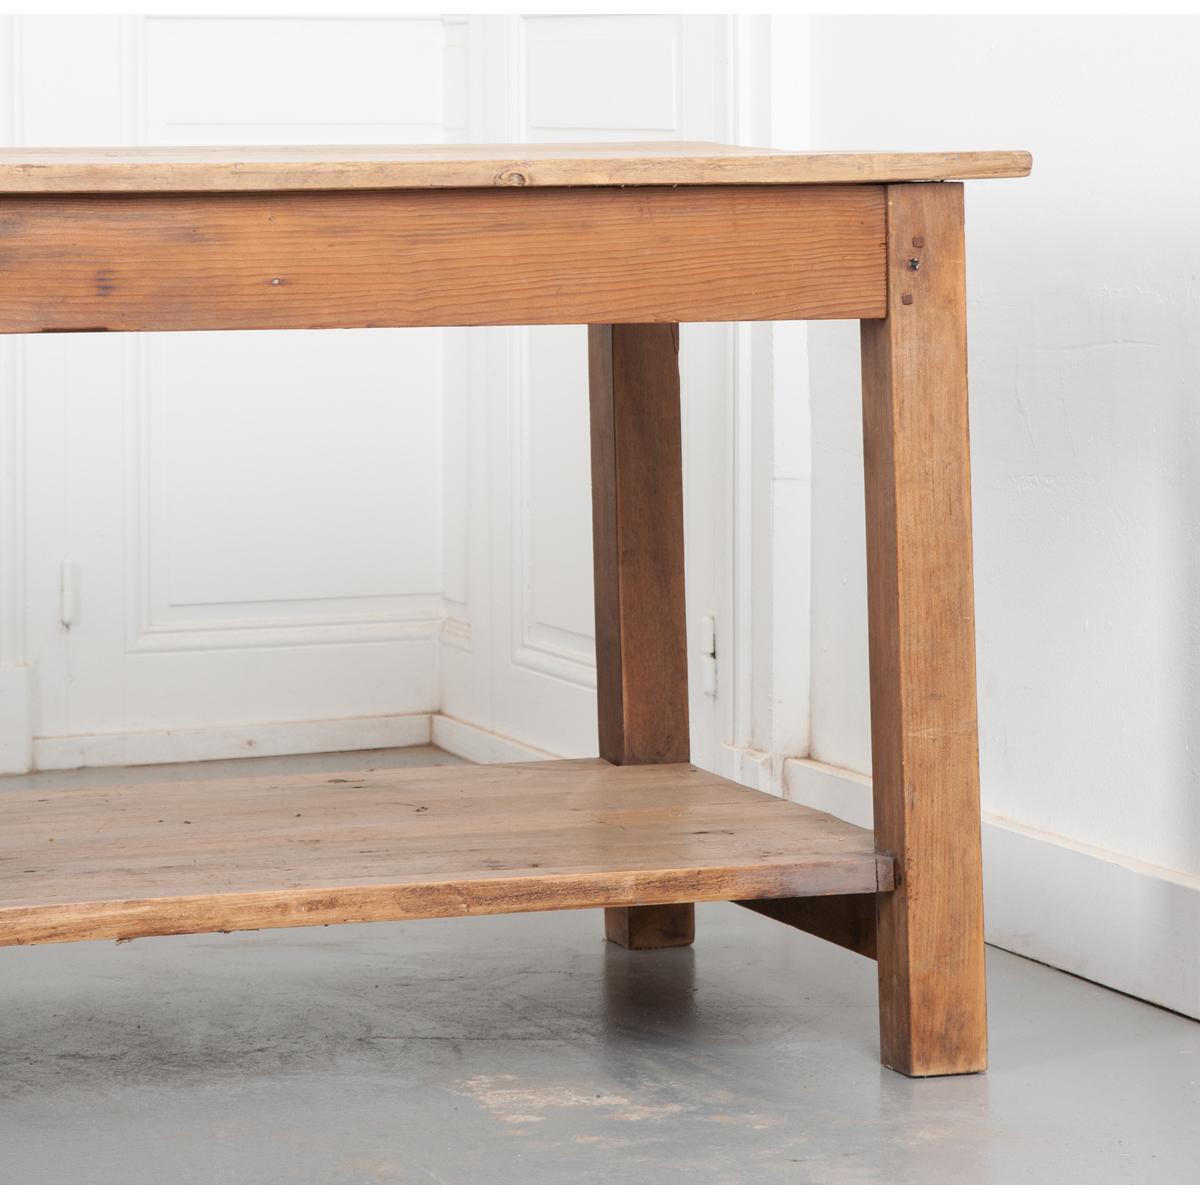 This exceptionally constructed 19th century French drapers table is over 11 feet long! Made from solid oak and pine. The work surface is made from three boards that bear the marks of many years of life that give it a great patina. The whole is